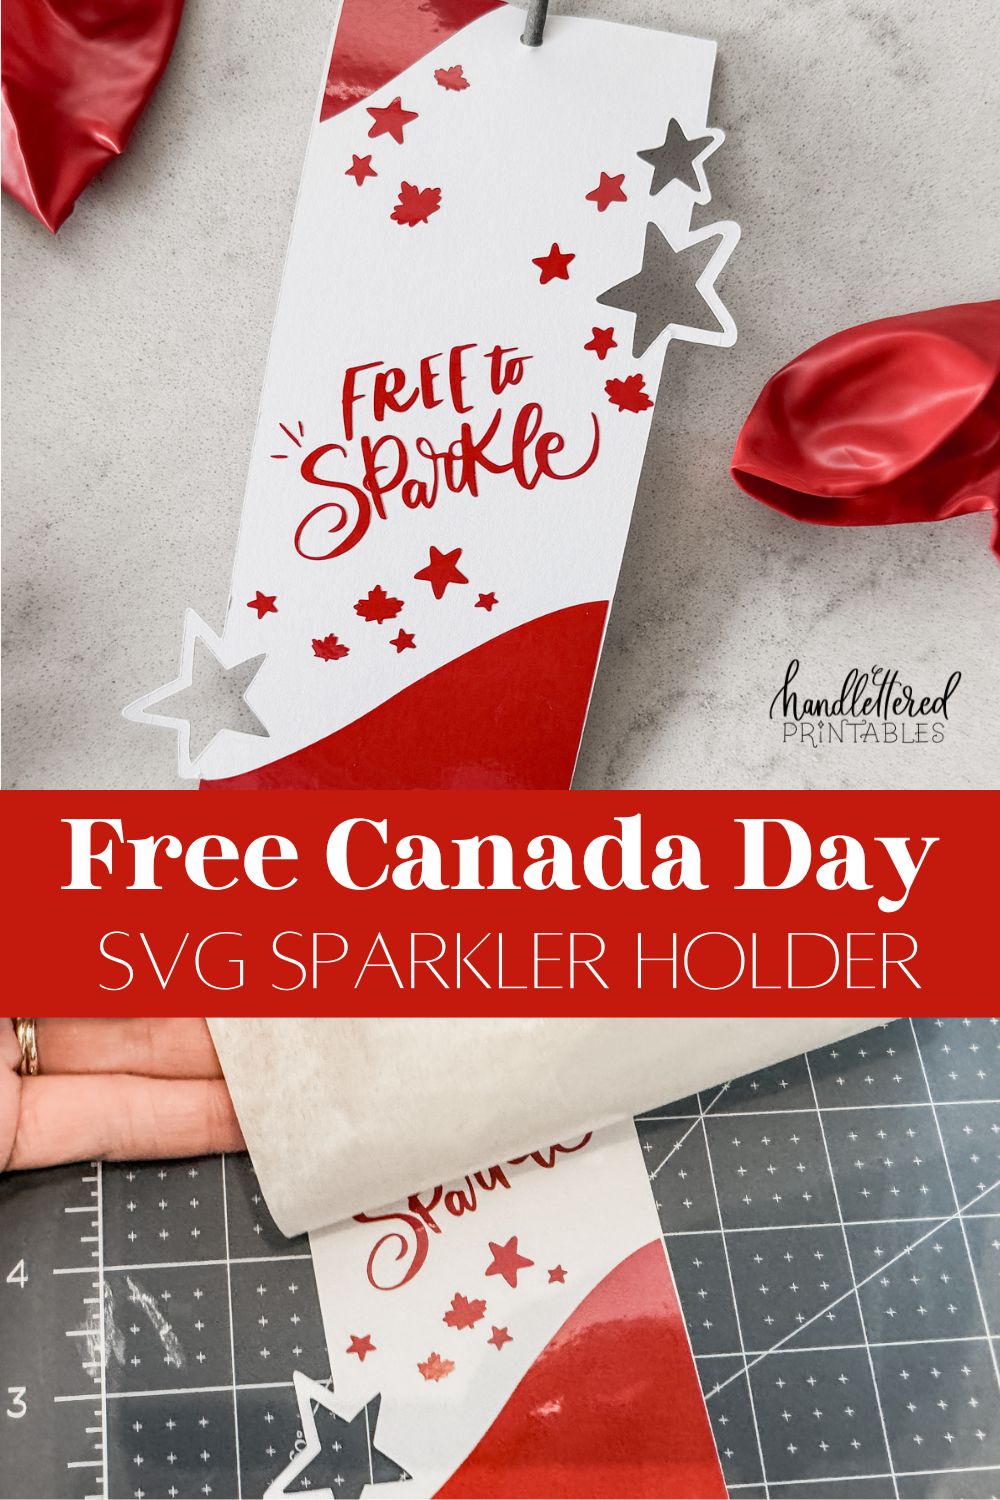 image of sparkler holder made with cricut- design has stars and maple leaves and the hand lettering 'free to sparkle' sparkler holder shown on marble countertop with red and white balloons second image shows sparkler holder being made, transfer paper being peeled back text over reads: free canada day SVG sparkler holder